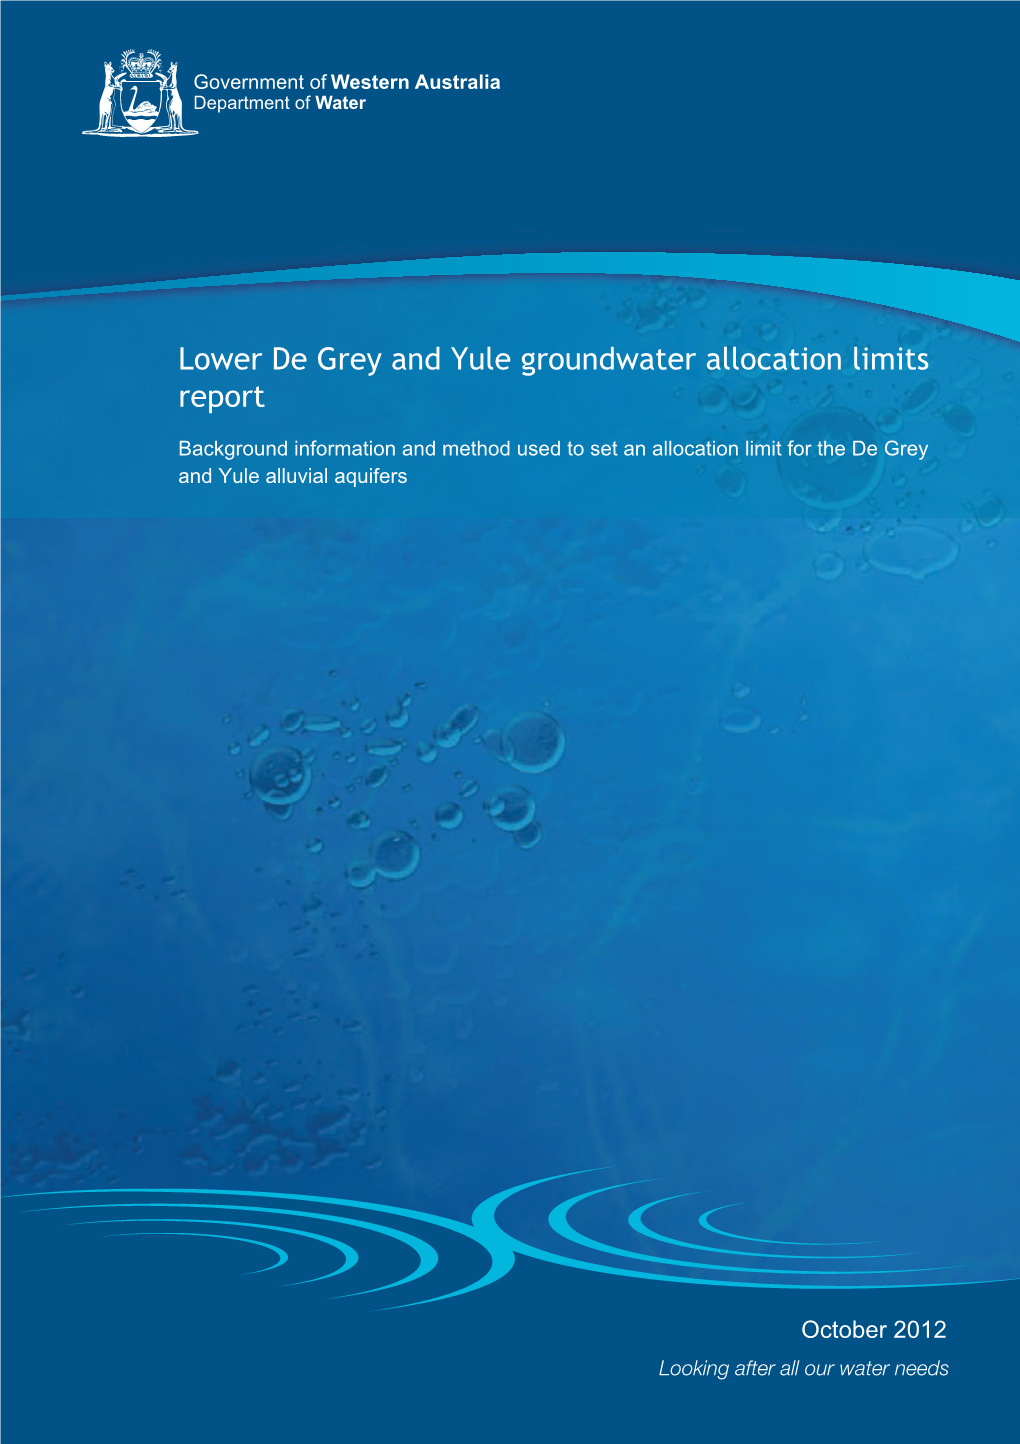 Lower De Grey and Yule Groundwater Allocation Limits Report